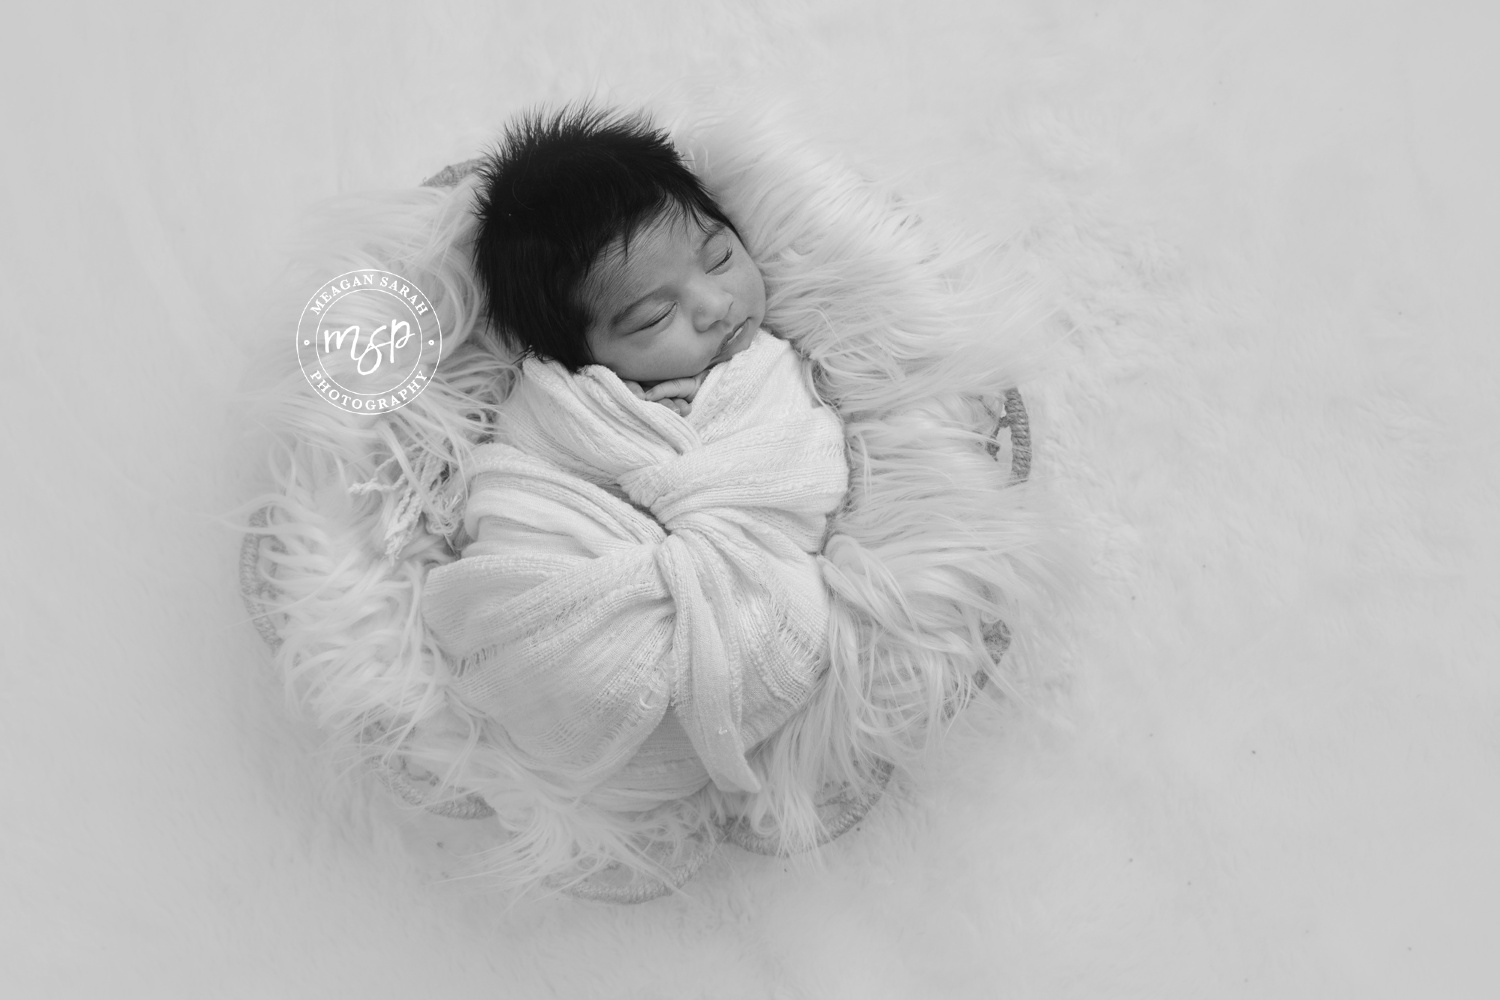 Girl,Baby Photographer Leeds,Baby Photography Leeds,Baby Pictures,Cute babies,Leeds Newborn Photographer,Leeds Newborn Photography,Leeds Photographer,Little Ones,Meagan Sarah Photography,Newborn Photography,Professional Photographer in Leeds,West Yorkshire Photographer,Yorkshire Newborn Photographer,Yorkshire Newborn Photography,Black and White,